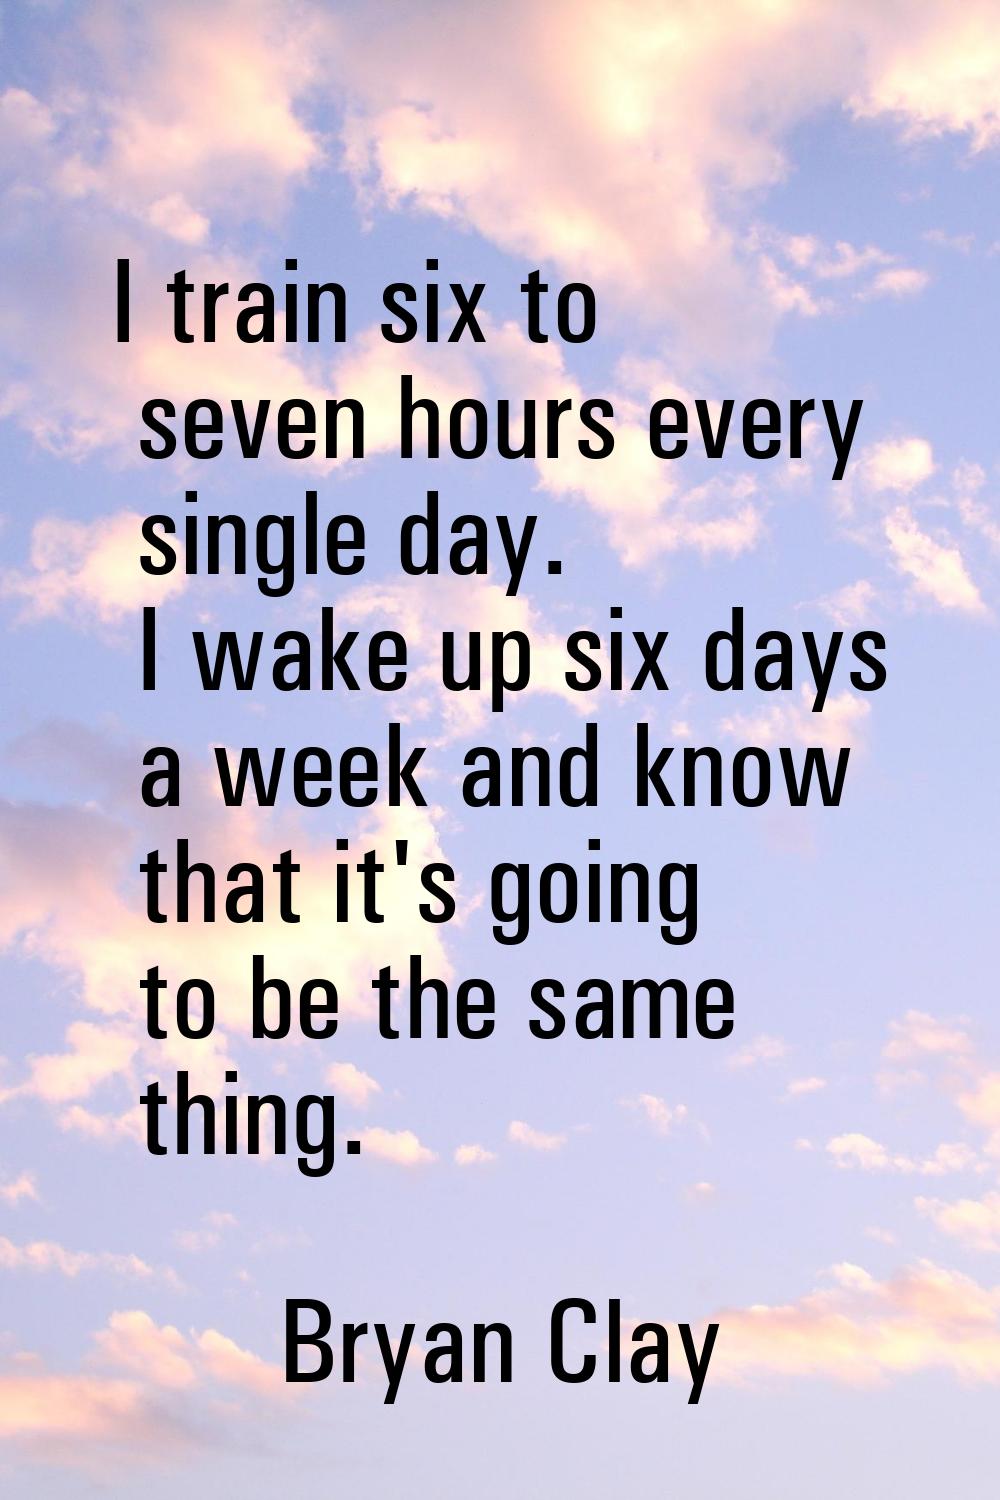 I train six to seven hours every single day. I wake up six days a week and know that it's going to 